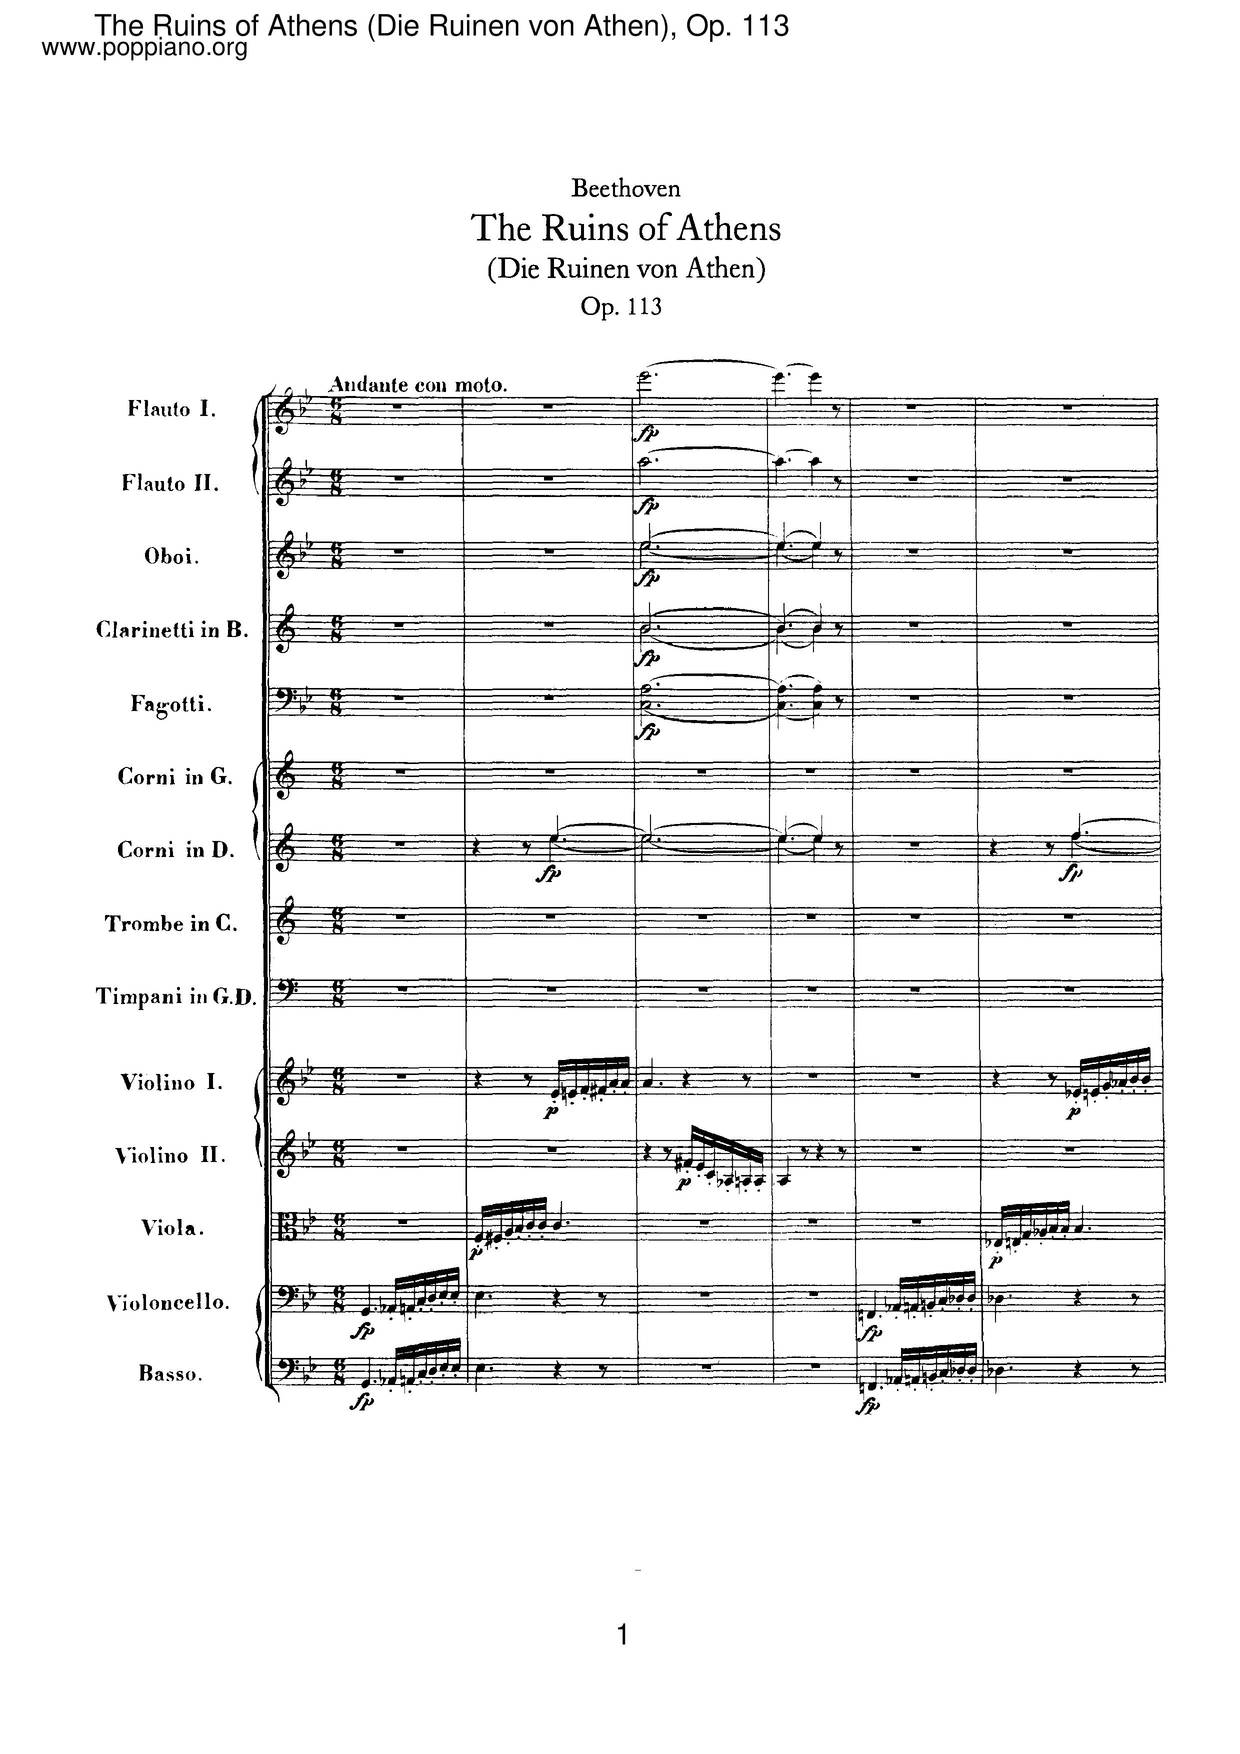 The Ruins Of Athens, Op. 113 Score